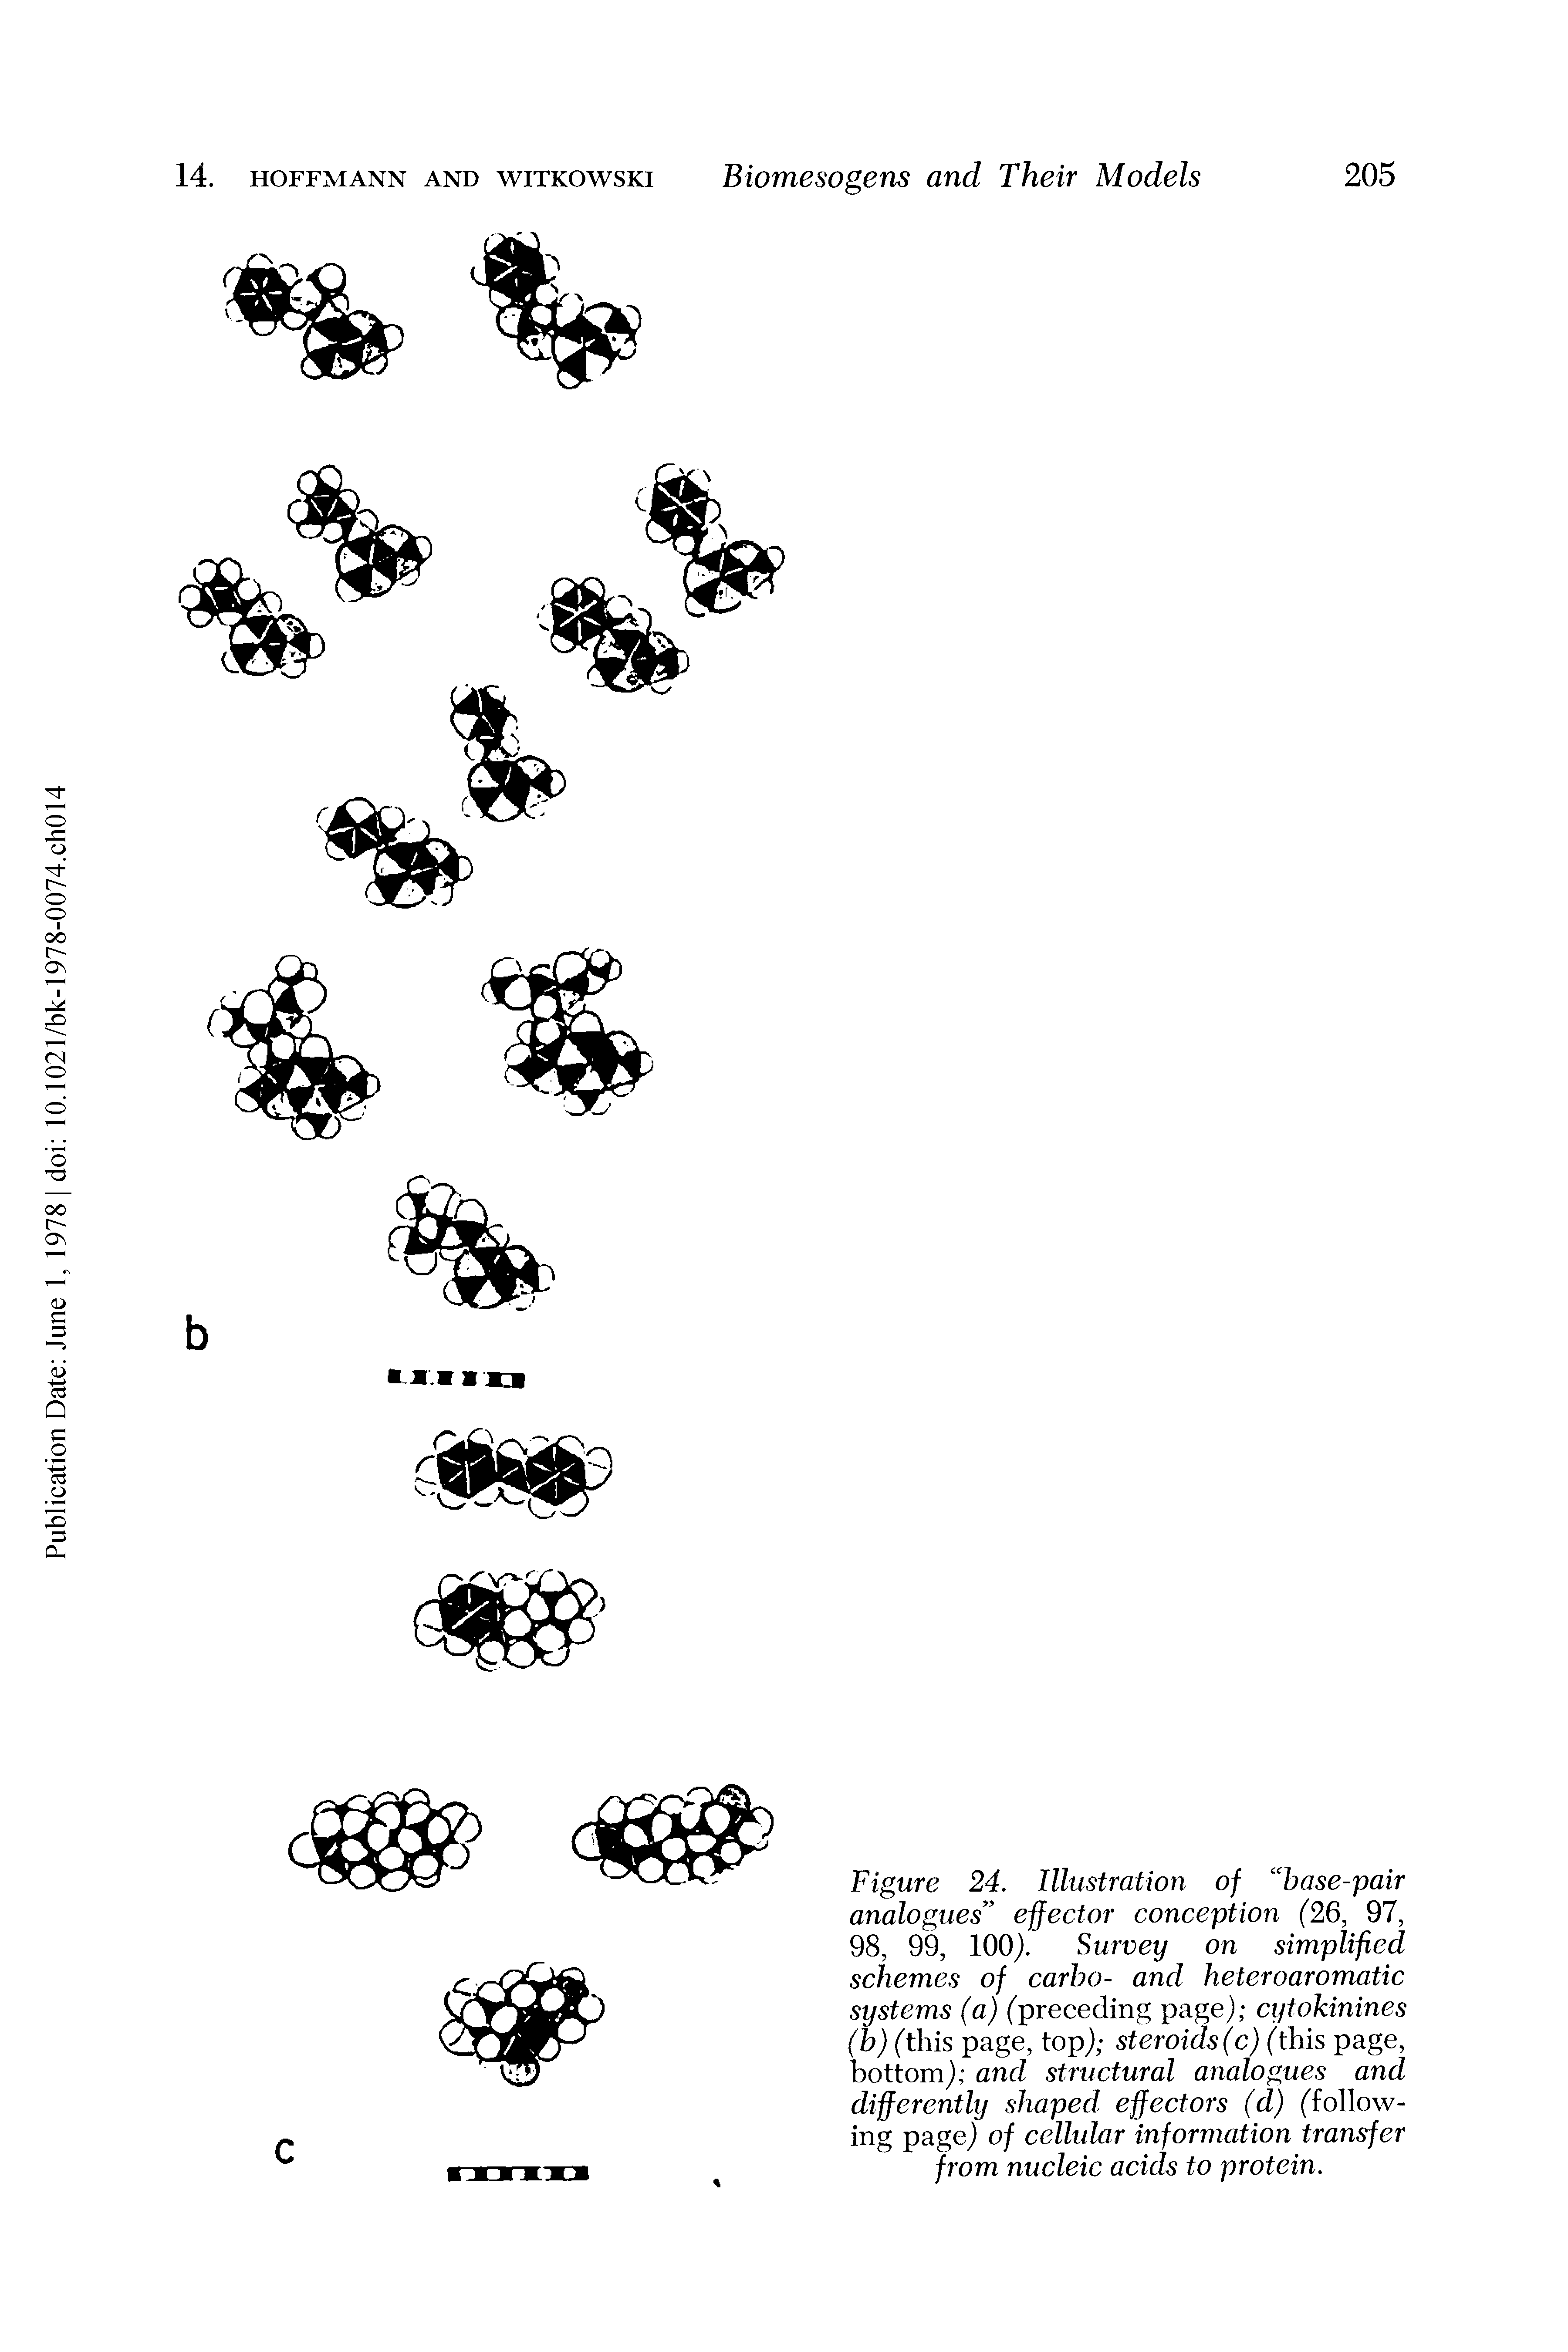 Figure 24. Illustration of hase-pair analogues effector conception (26, 97, 98, 99, 100). Survey on simplified schemes of carho- and heteroaromatic systems (a) (preceding page) cytokinines (b) (this page, top) steroids (c) (this page, bottom) and structural analogues and differently shaped, effectors (d) (following page) of cellular information transfer from nucleic acids to protein.